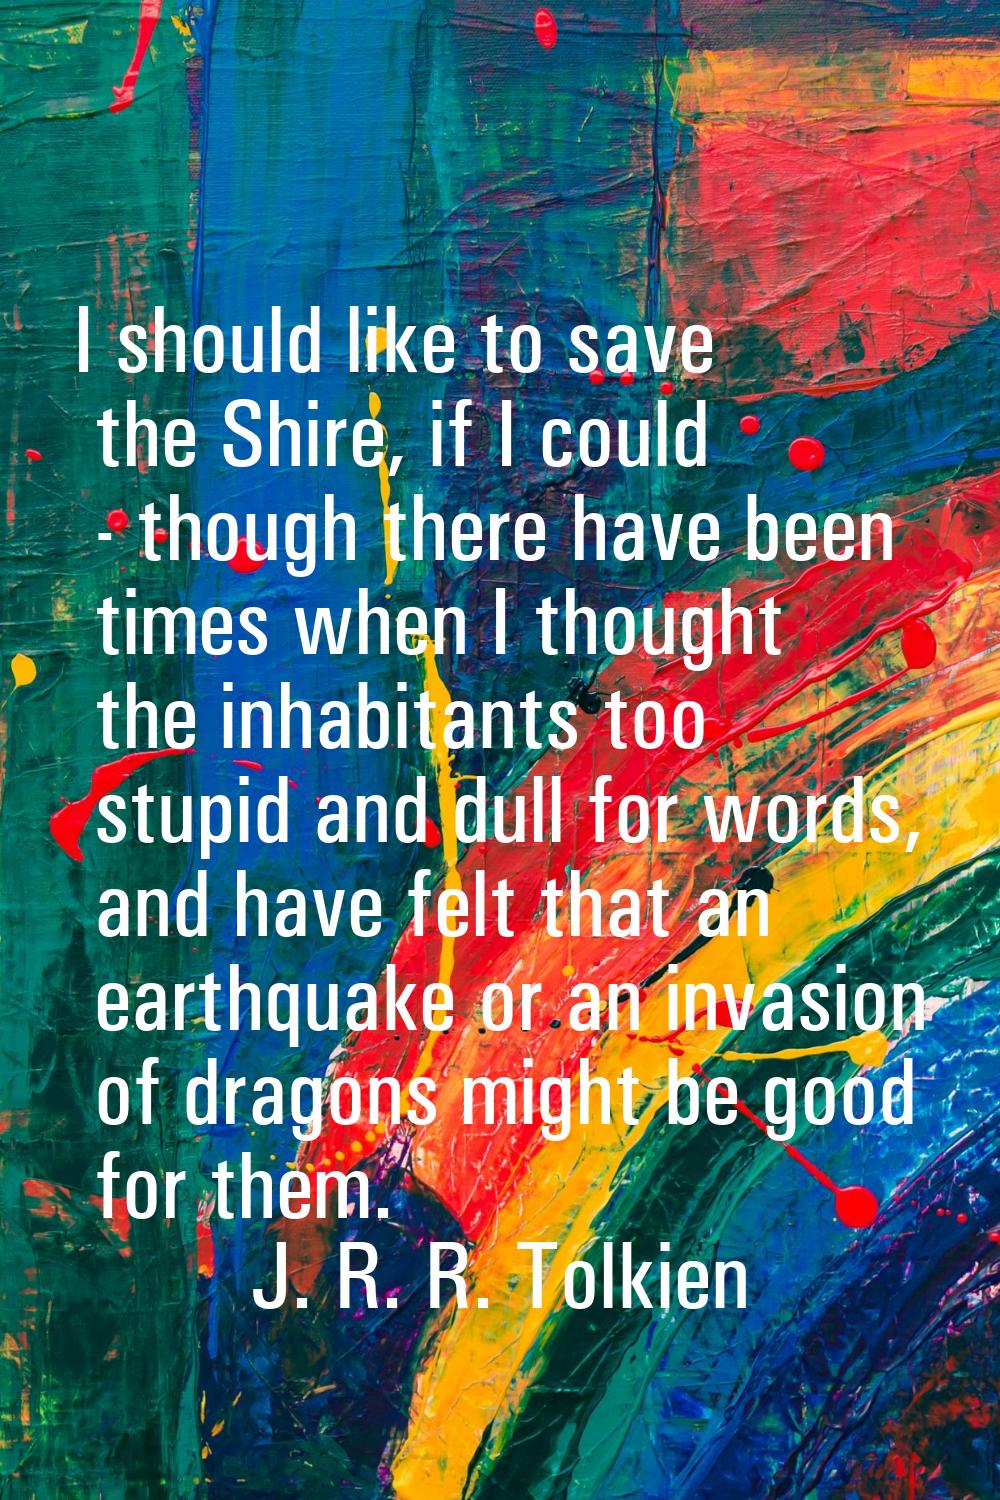 I should like to save the Shire, if I could - though there have been times when I thought the inhab